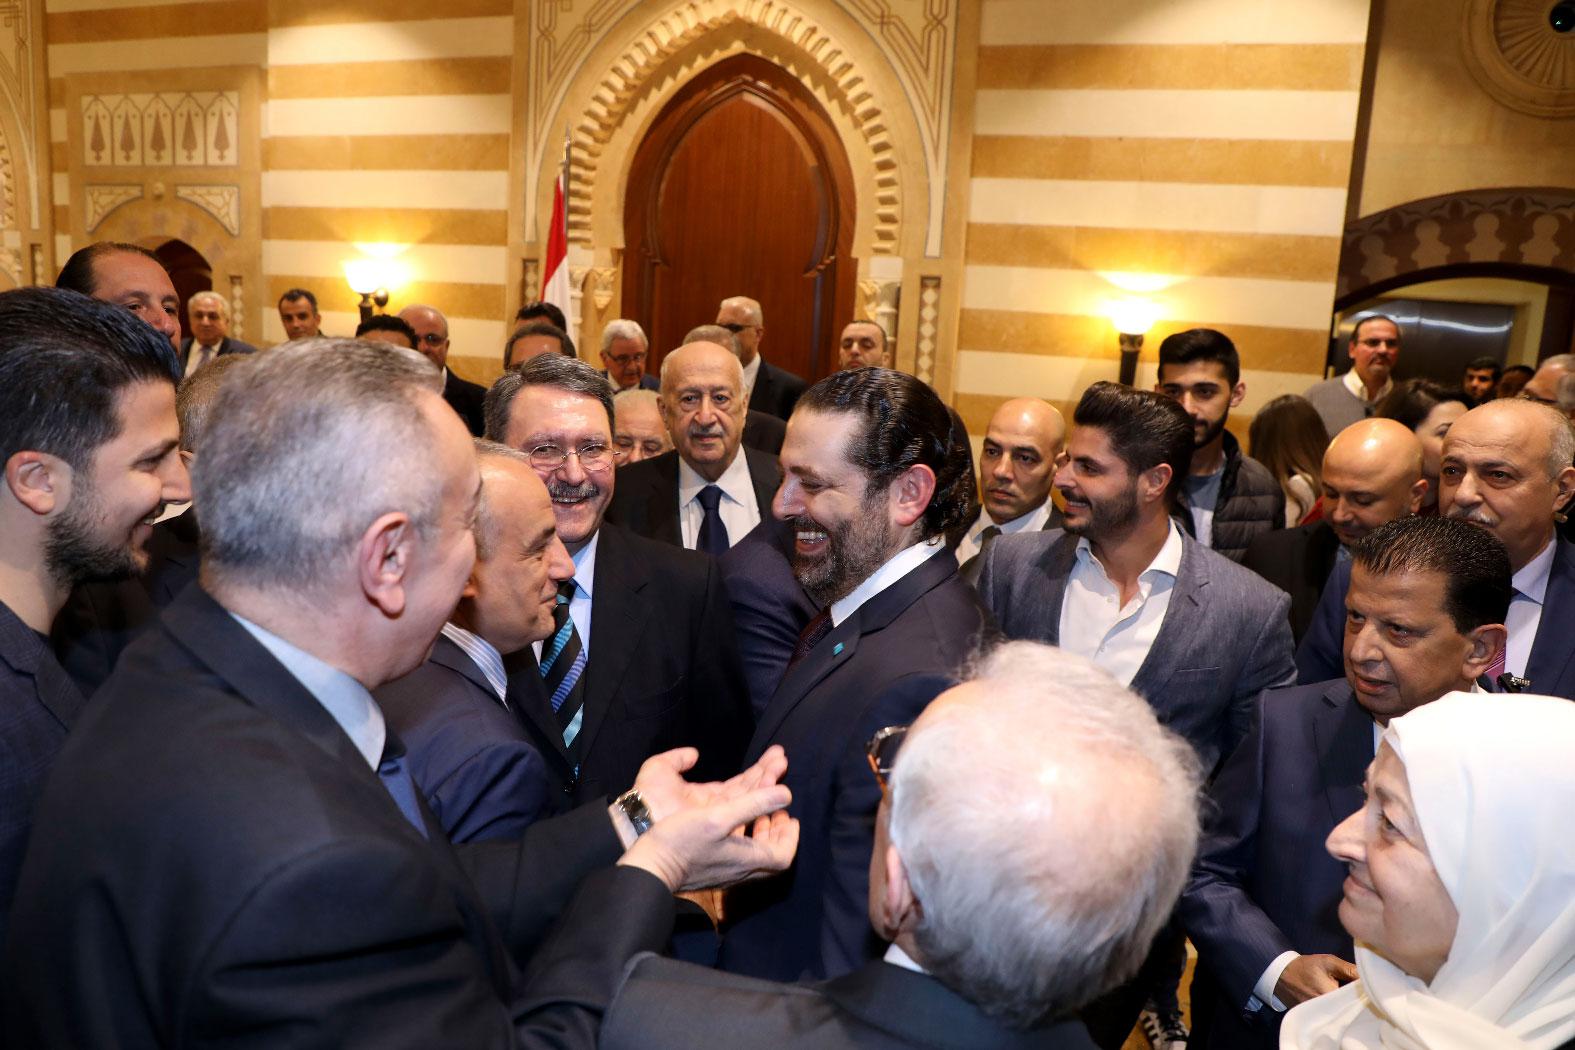 Lebanese Prime Minister Saad Hariri (C) stands amongst supporters after a press conference during which he announced the formation of a new national unity government following months of wrangling between rival groups, at Baabda Palace.